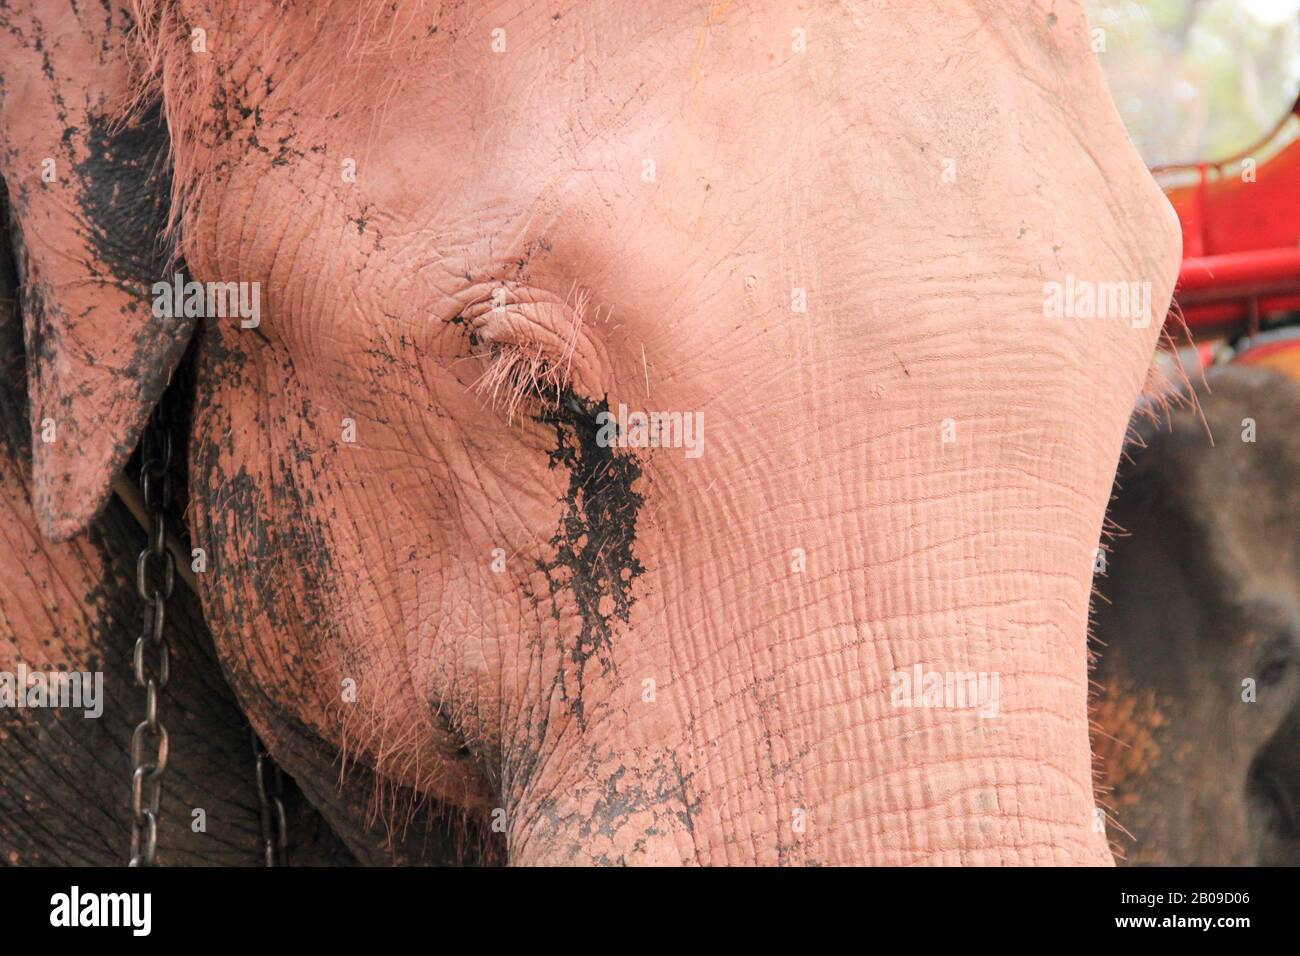 Sad, crying asian elephant - close up. Looks like a rosa elephant, chained, tourist attraction in Thailand Stock Photo